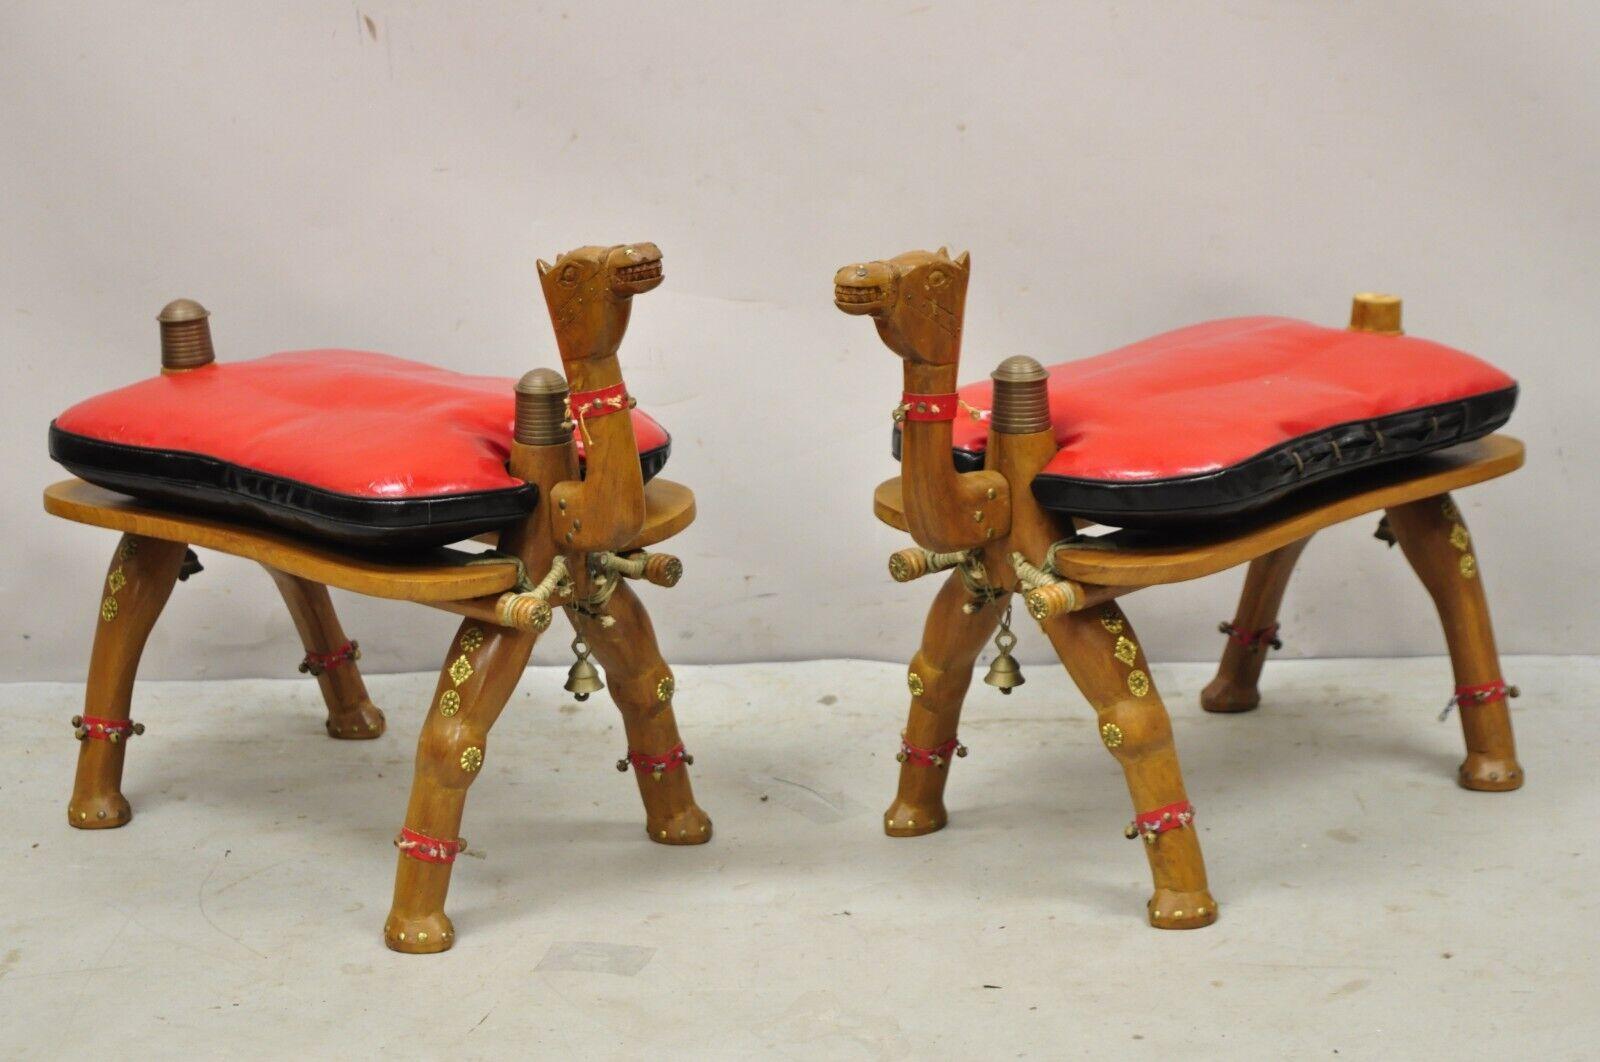 Vintage Camel Saddle Stools Carved Wood Black/Red Cushions, a Pair For Sale 2